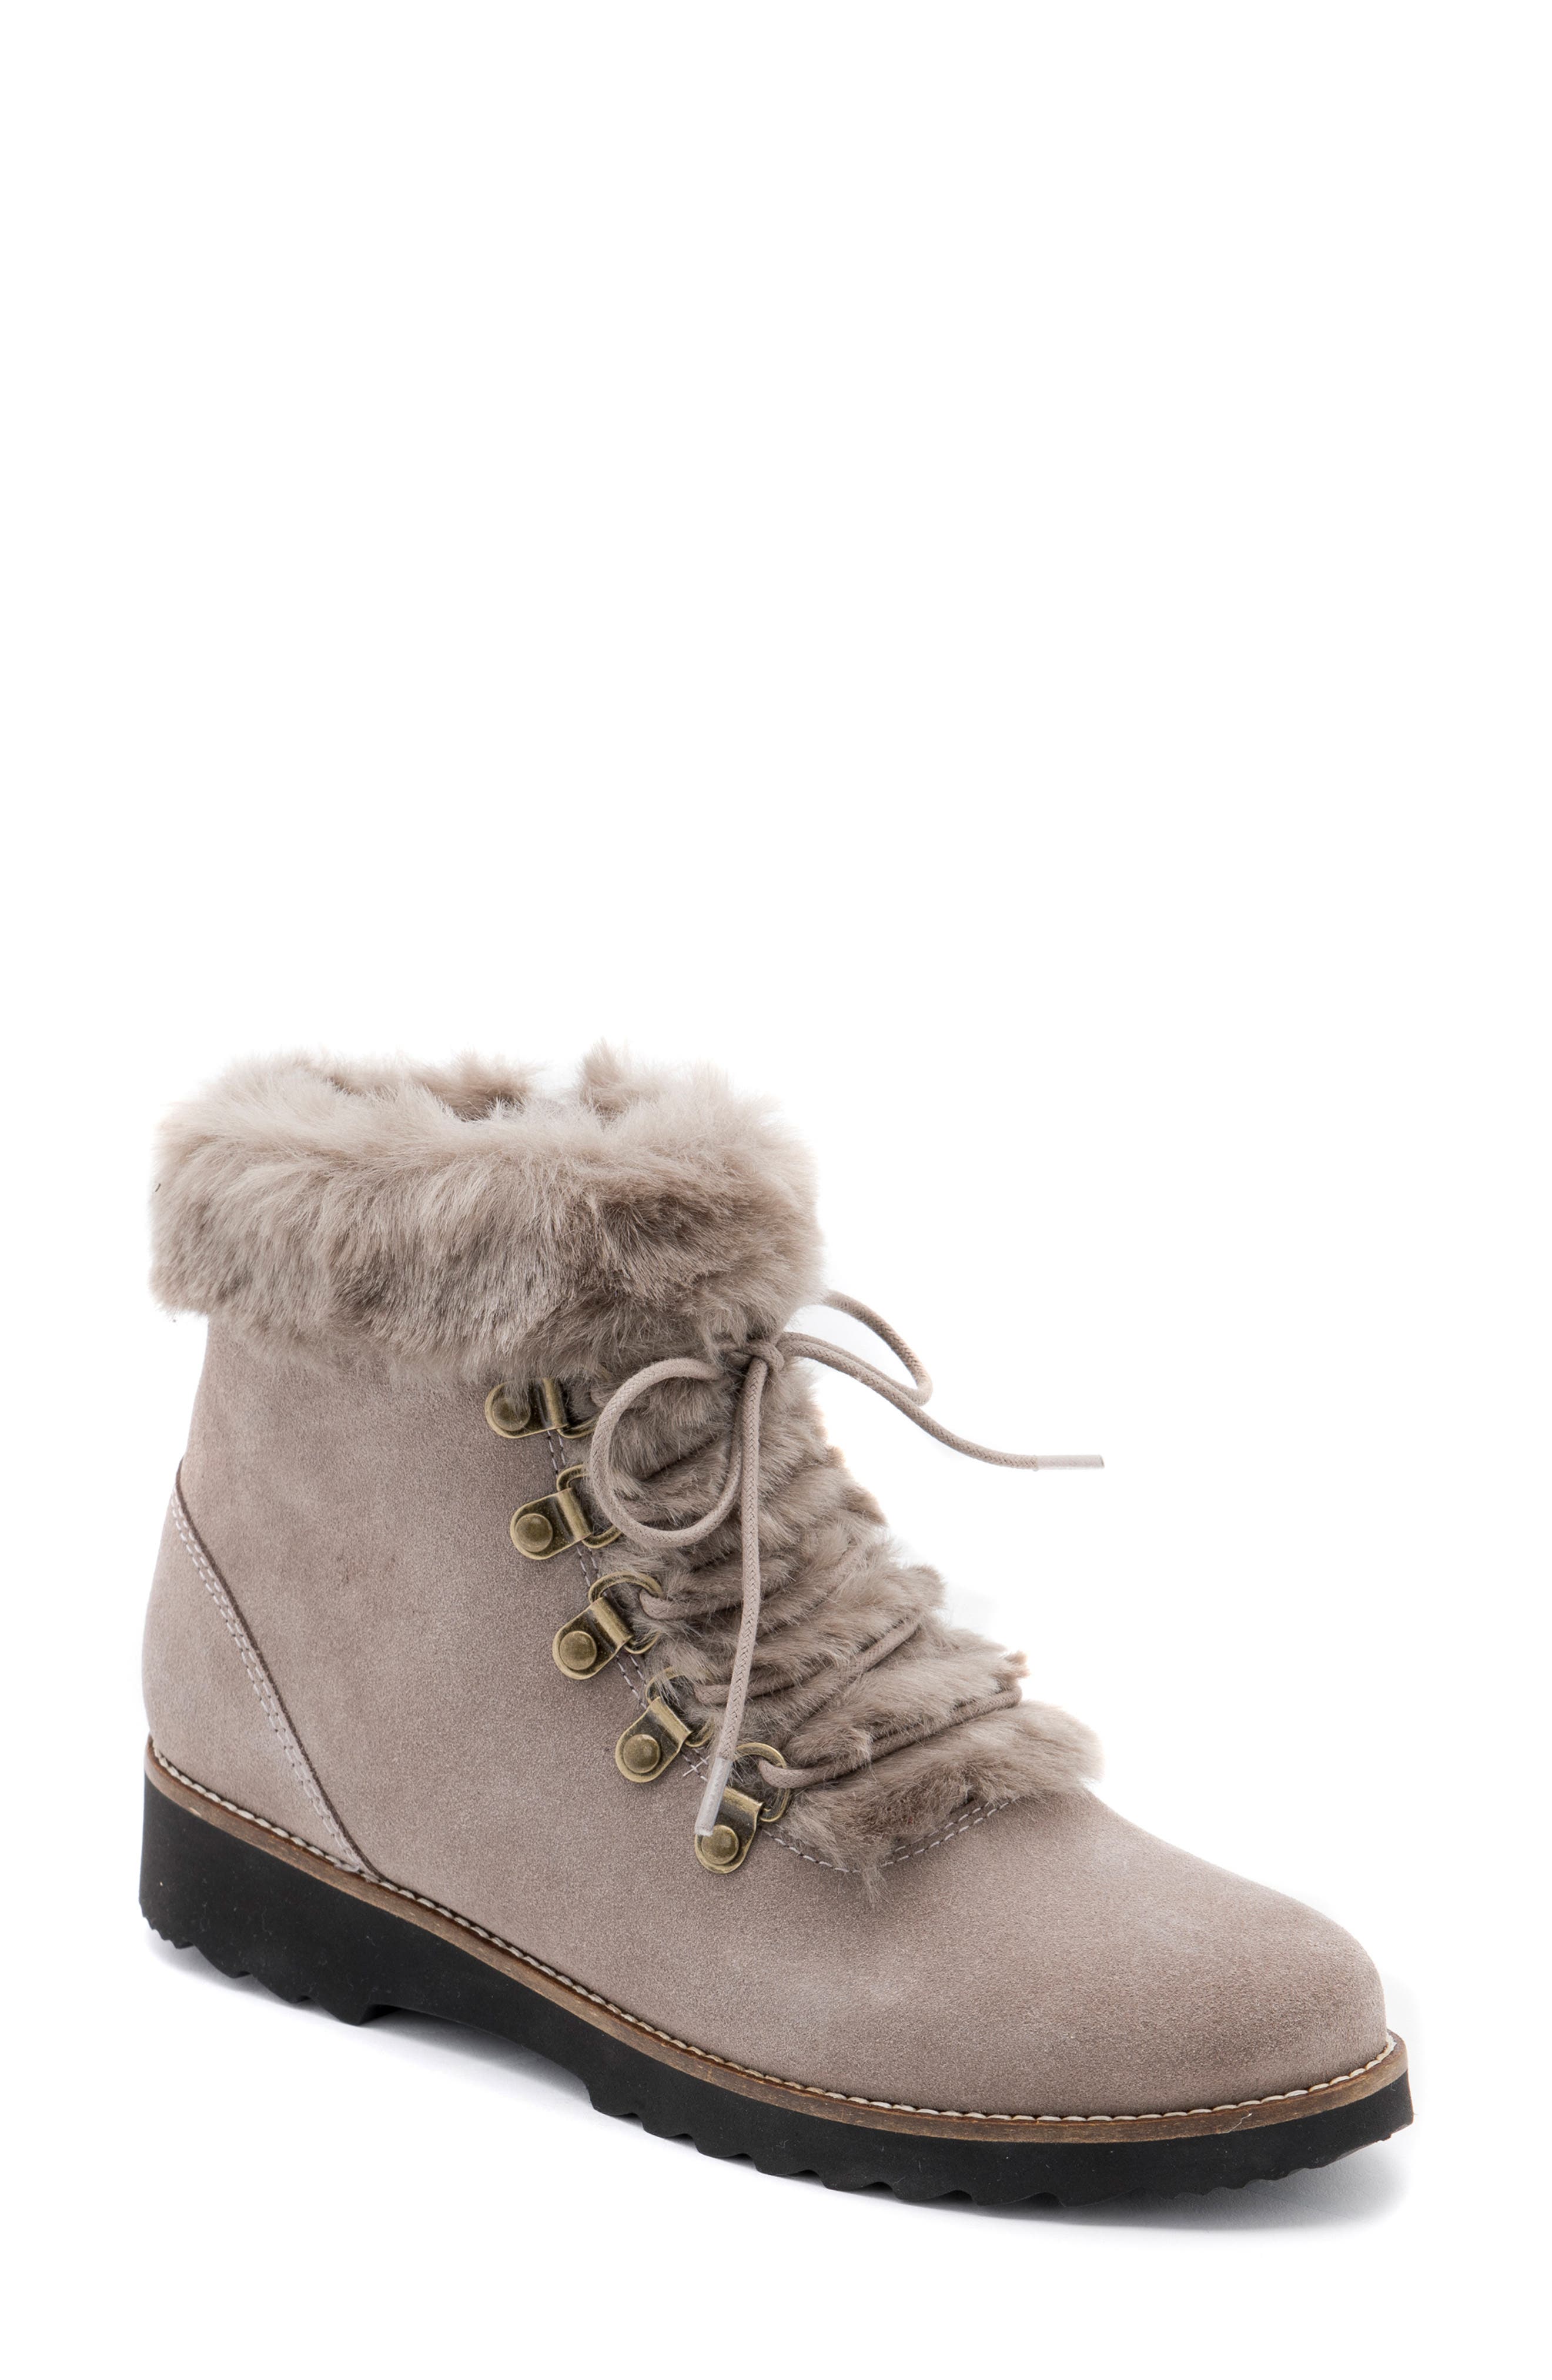 blondo lace up boots